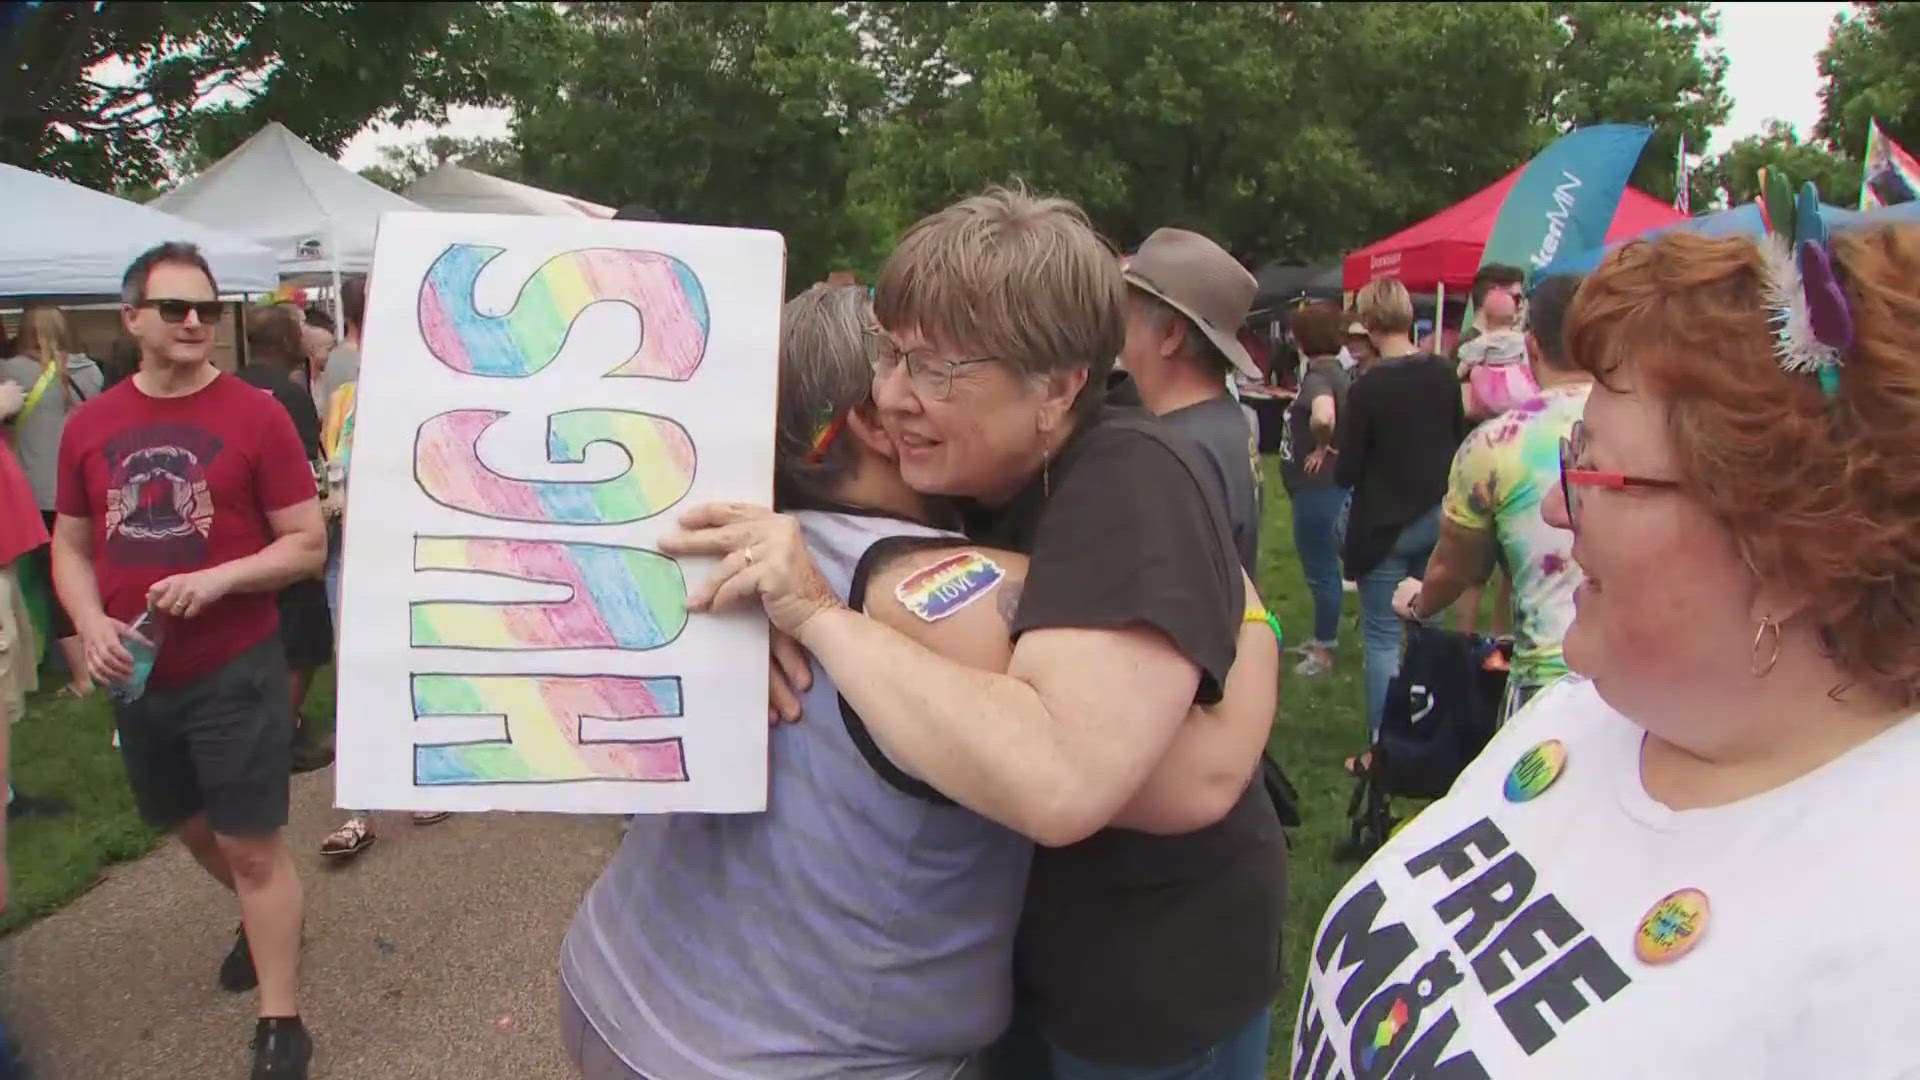 Twin Cities Pride has kicked off, as thousands flood Loring Park to celebrate inclusion.